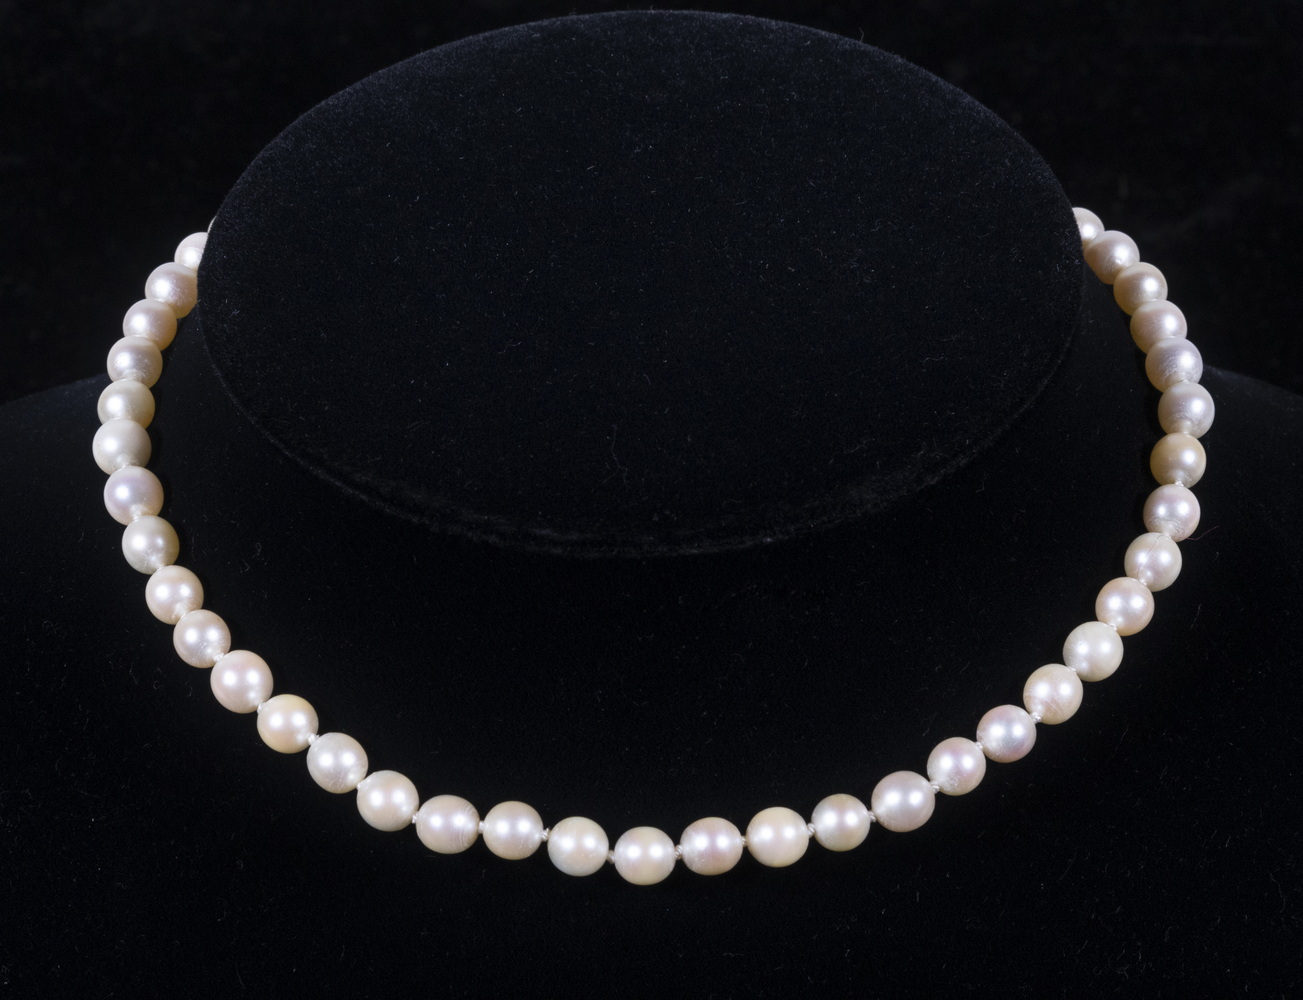 PEARL NECKLACE 15 long strand of 7mm